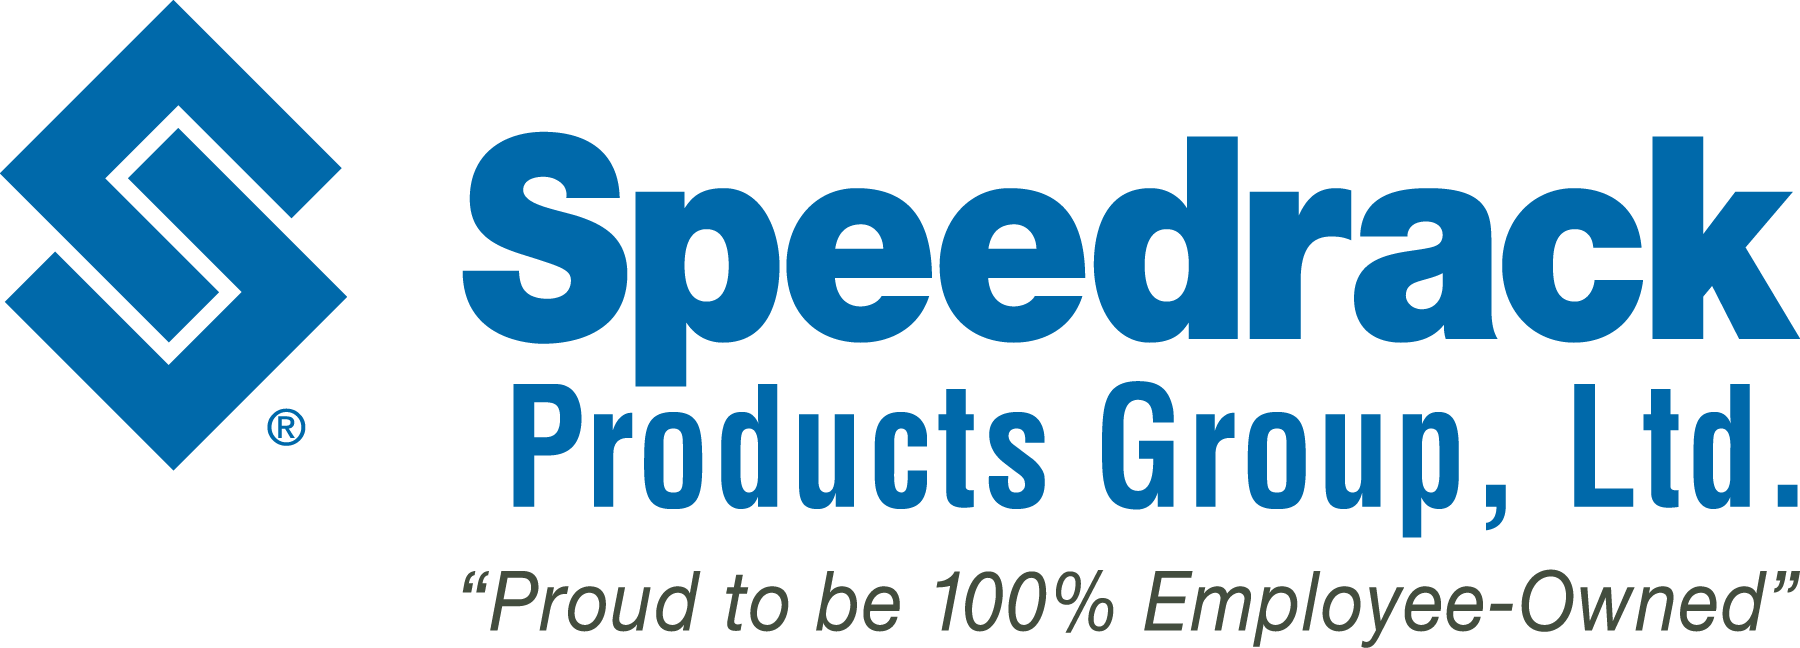 Speedrack Products Group